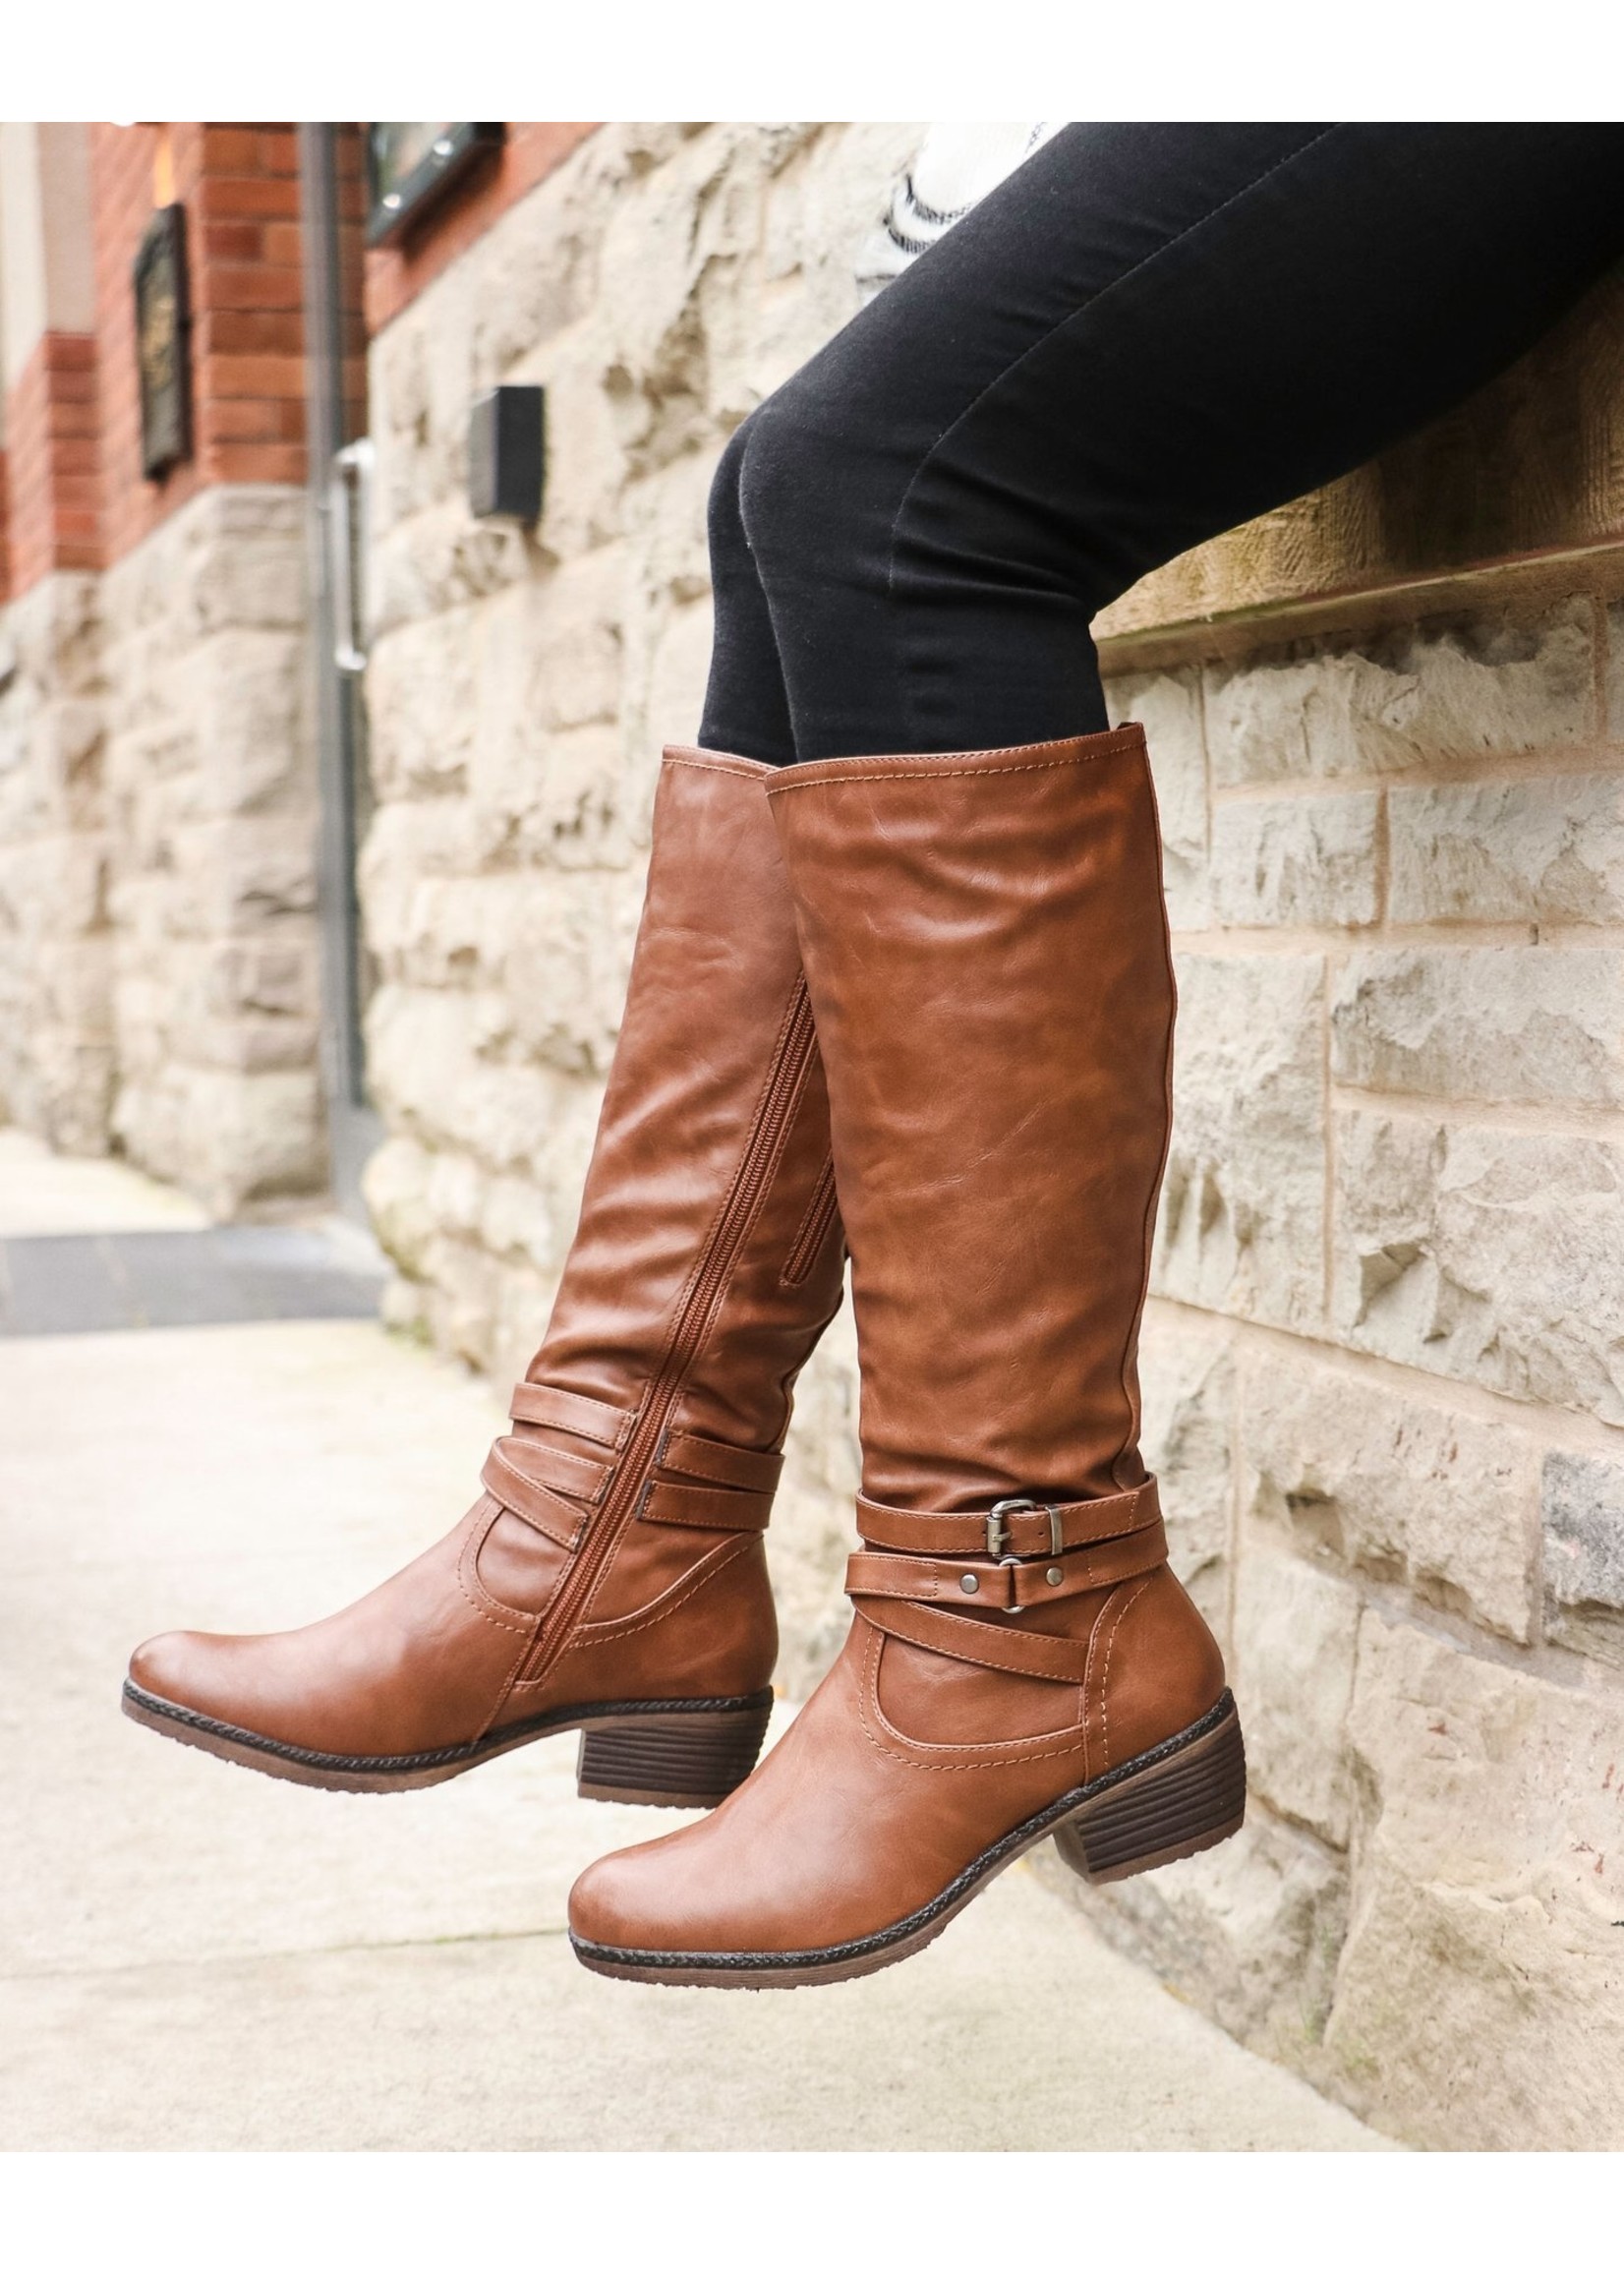 Taxi Vermont - Wide Calf Tall Boot